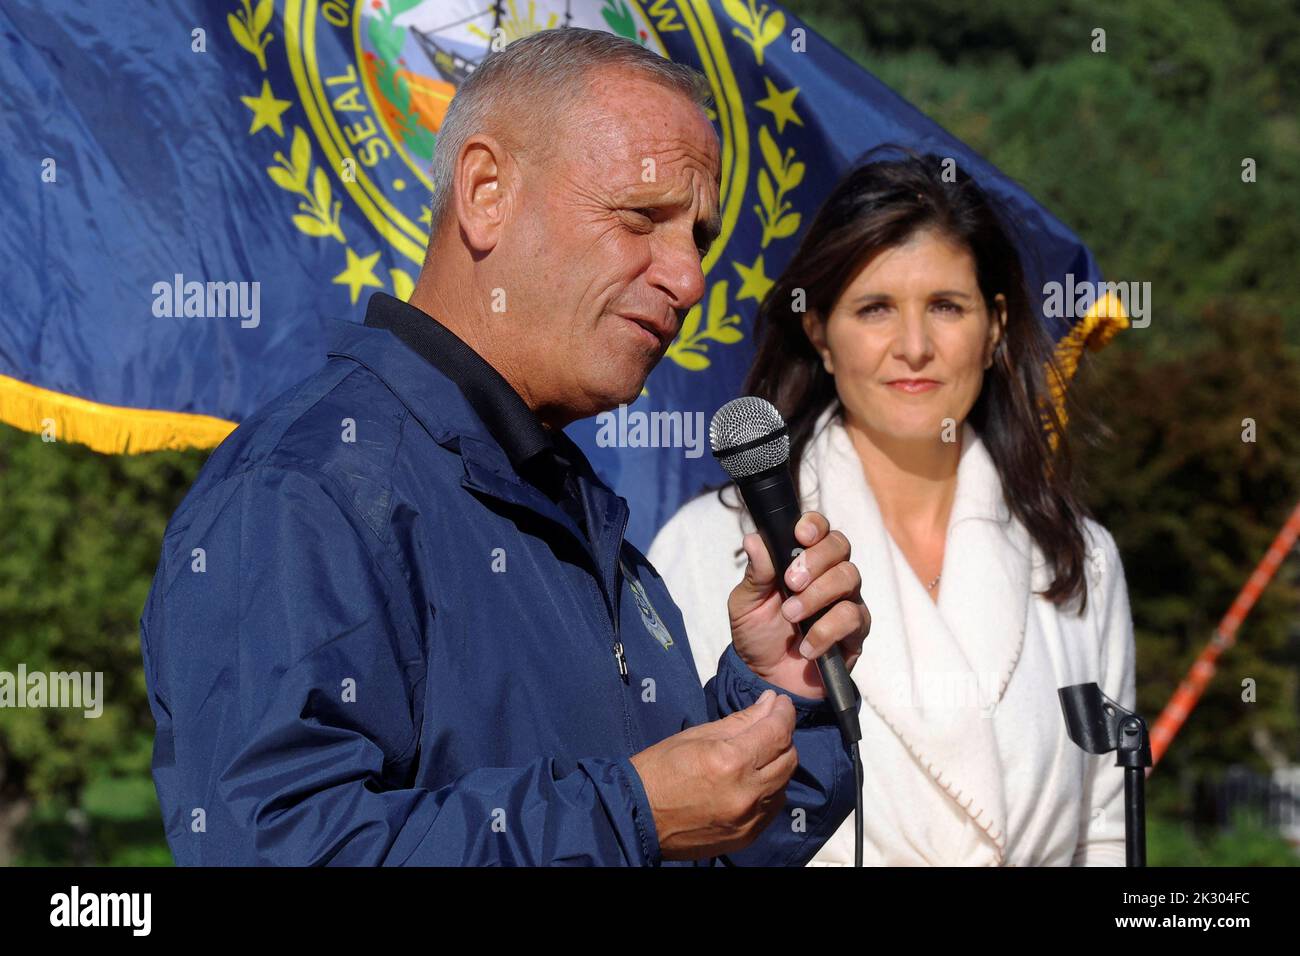 Republican candidate for the U.S. Senate Don Bolduc is joined at a campaign stop by former U.S. Ambassador to the United Nations Nikki Haley, who recently endorsed Bolduc, in Hollis, New Hampshire, U.S., September 23, 2022. REUTERS/Brian Snyder Stock Photo